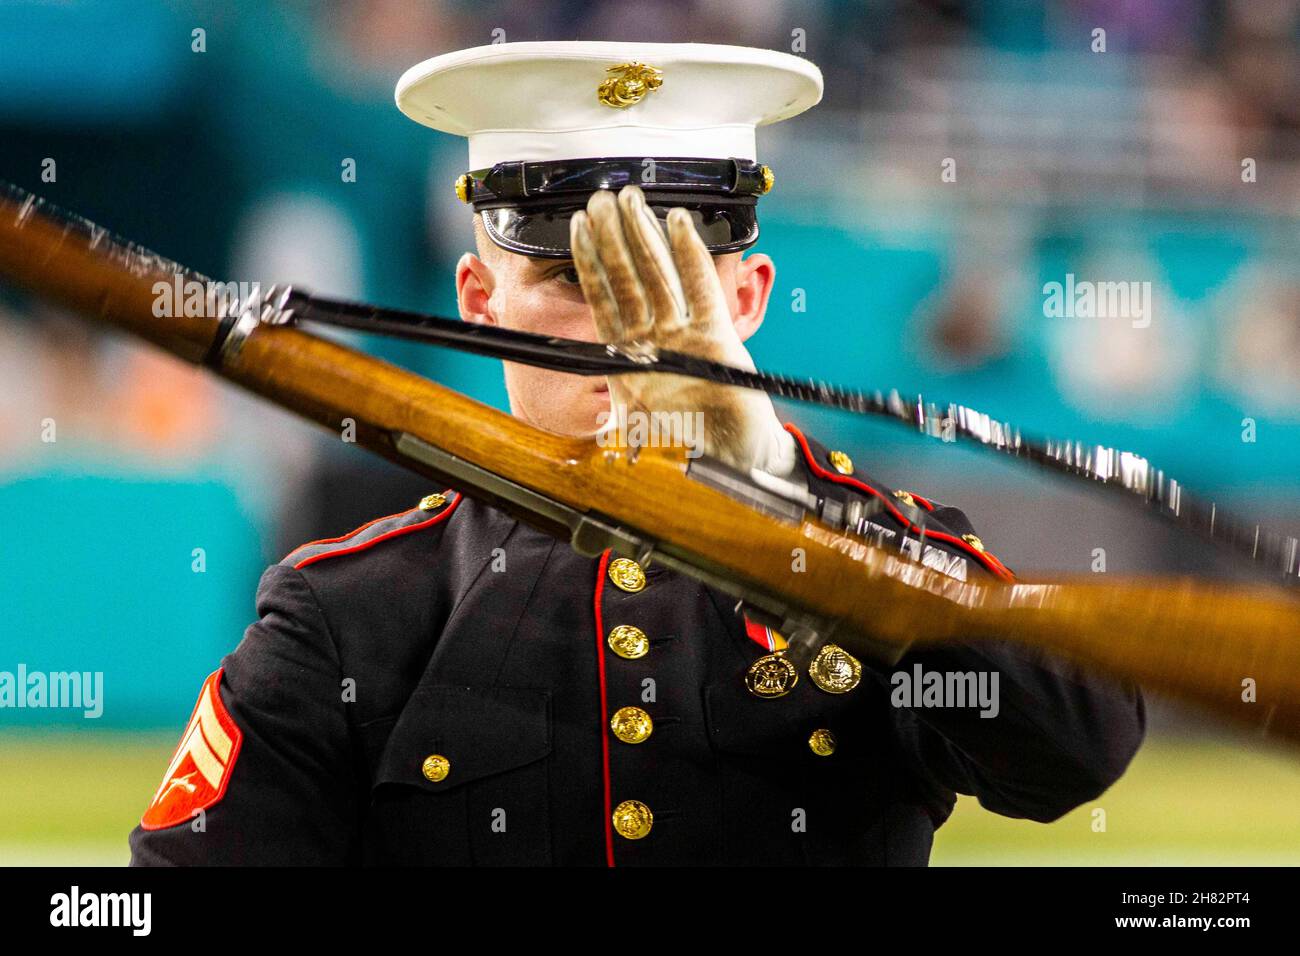 Miami, Florida, USA. 11th Nov, 2021. Corporal Landon Johnson, rifleman, Silent Drill Platoon, performs during a halftime show at Hard Rock Stadium in Miami, Nov. 11, 2021. During the month of November, the National Football League honors the military with Salute to Service games; the Silent Drill Platoon performed this week at the Miami Dolphins' game against the Baltimore Ravens. Credit: U.S. Marines/ZUMA Press Wire Service/ZUMAPRESS.com/Alamy Live News Stock Photo